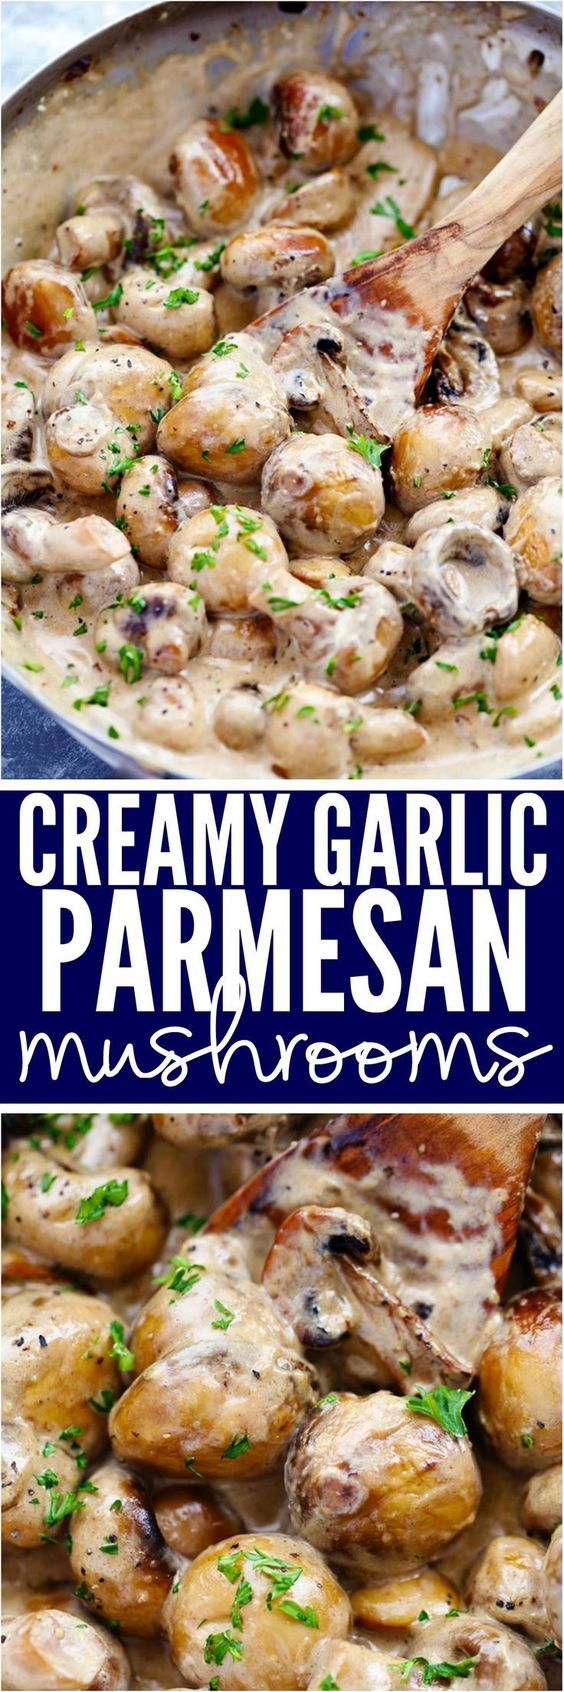 Creamy Garlic Parmesan Mushrooms are sautéed in a butter garlic until tender and then tossed in the most AMAZING creamy parmesan sauce. These are great as a side, on top of meat or eaten by themselves and ready in under 10 minutes!